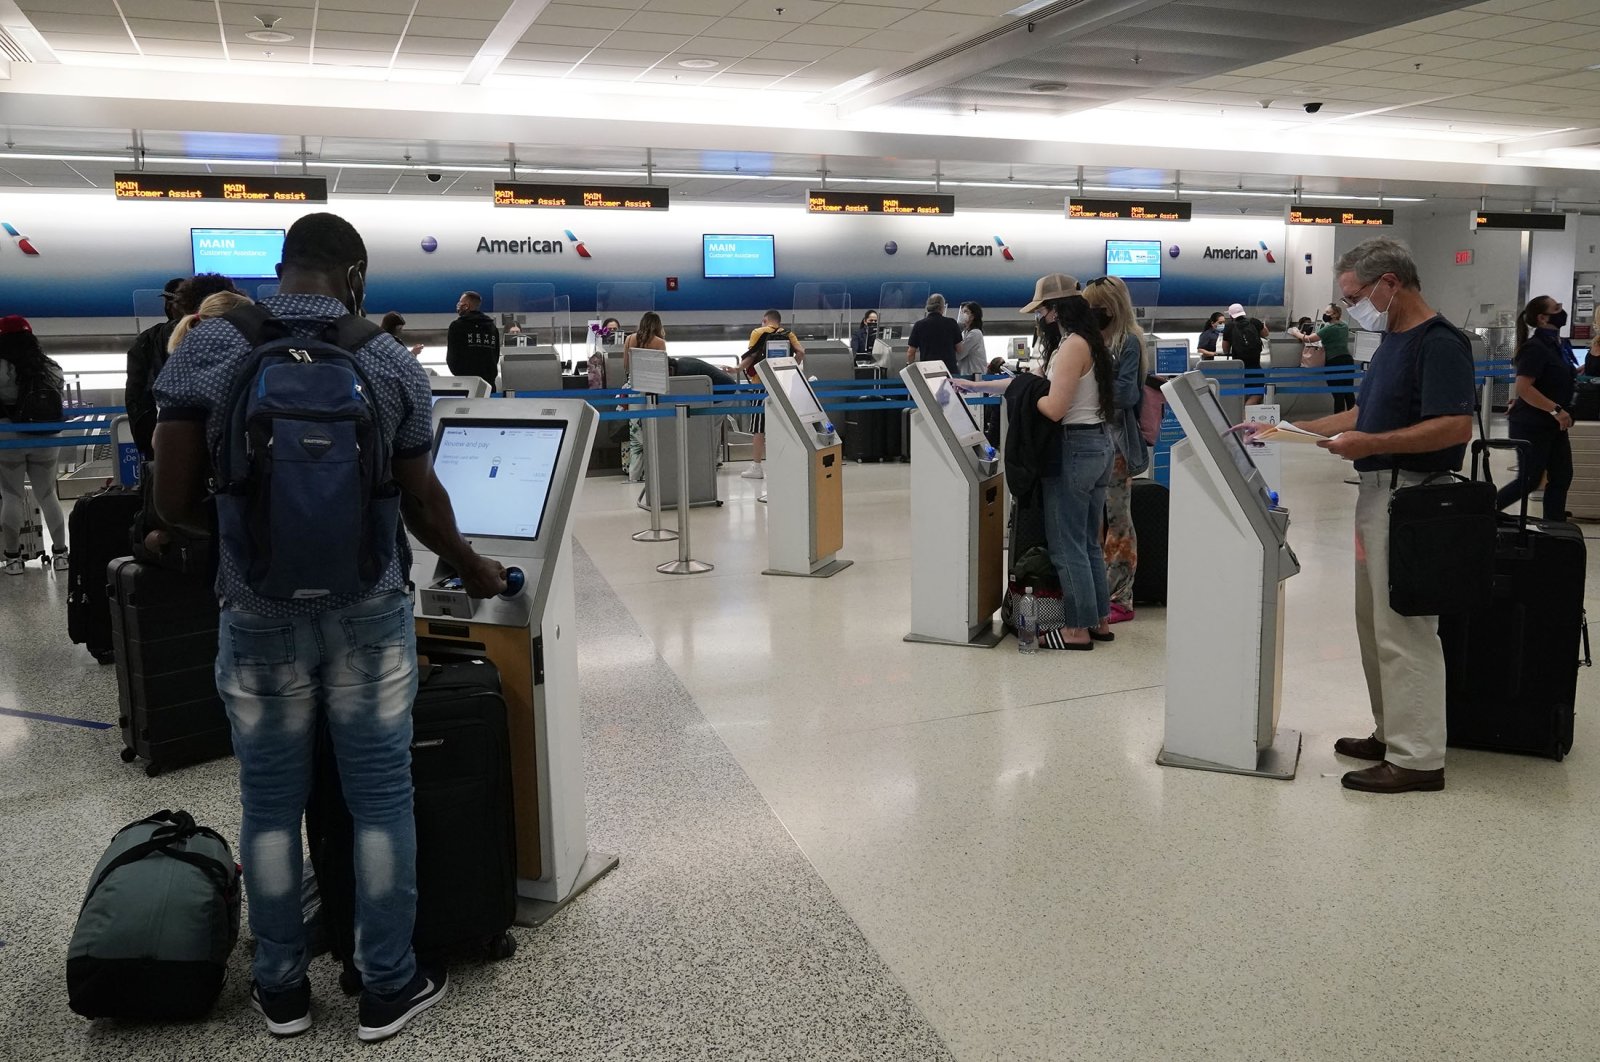 Travelers use the self-service kiosk to check in and pay for luggage at the American Airlines terminal, in Miami, U.S., April 29, 2021. (AP Photo)